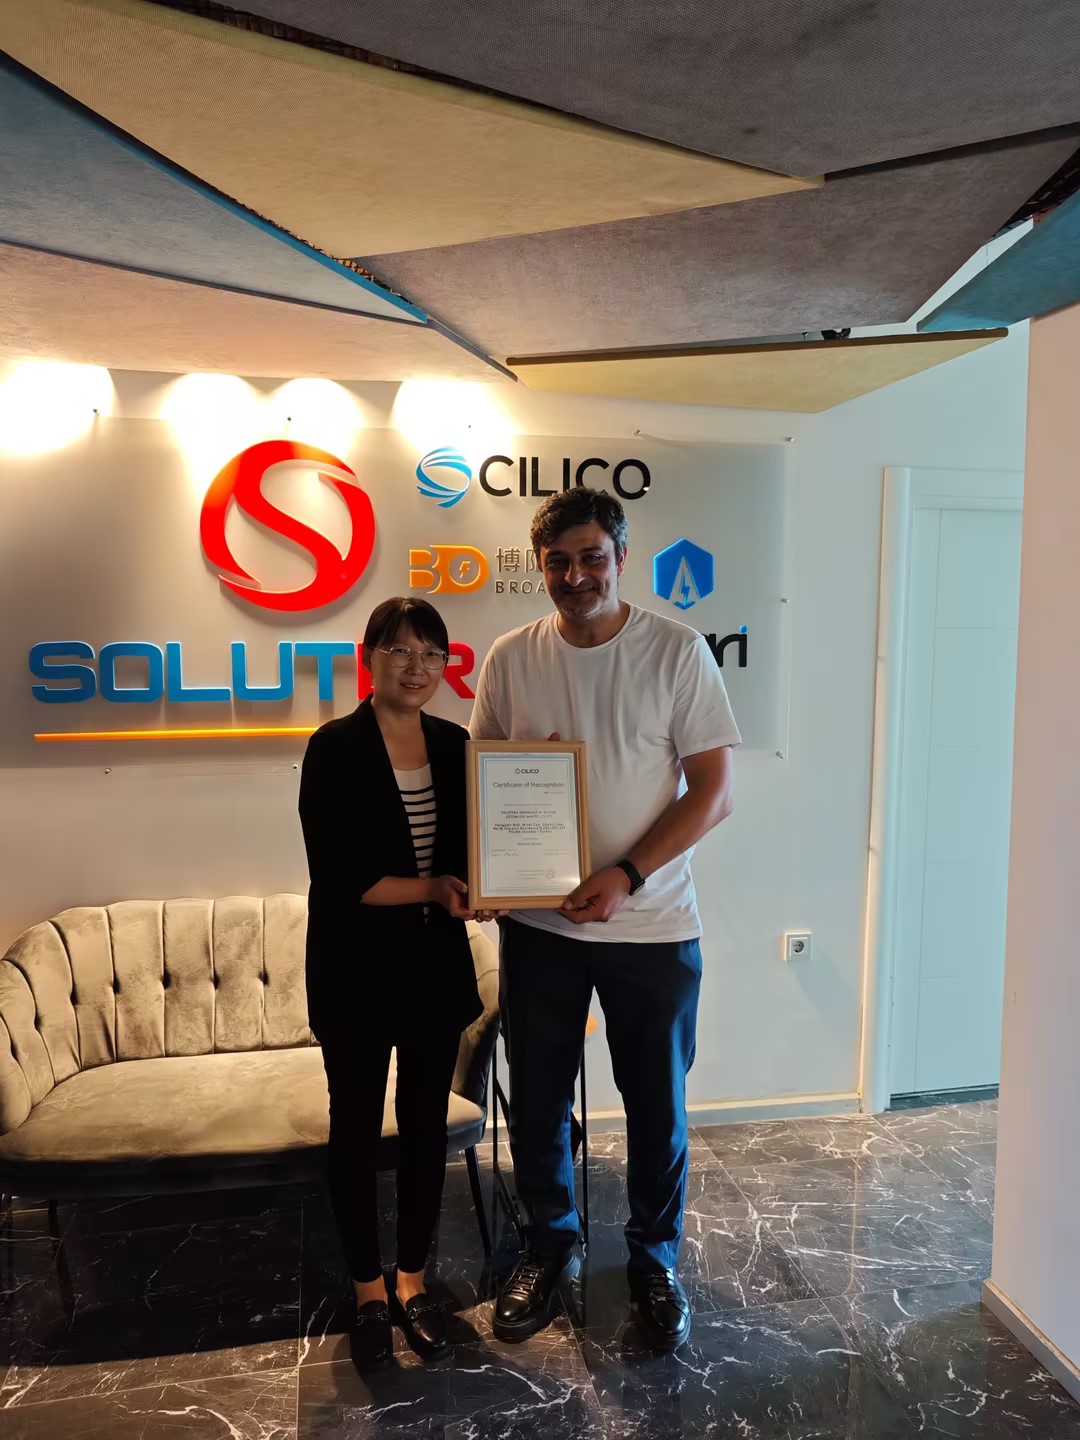 Warmly celebrate the establishment of CILICO Turkey Branch， and the Service Center with Solutera. For more support or help, pls contact with our country manager serdal.dincer@cilico.com.tr #CILICO #Service center #handheld terminal #RFID 